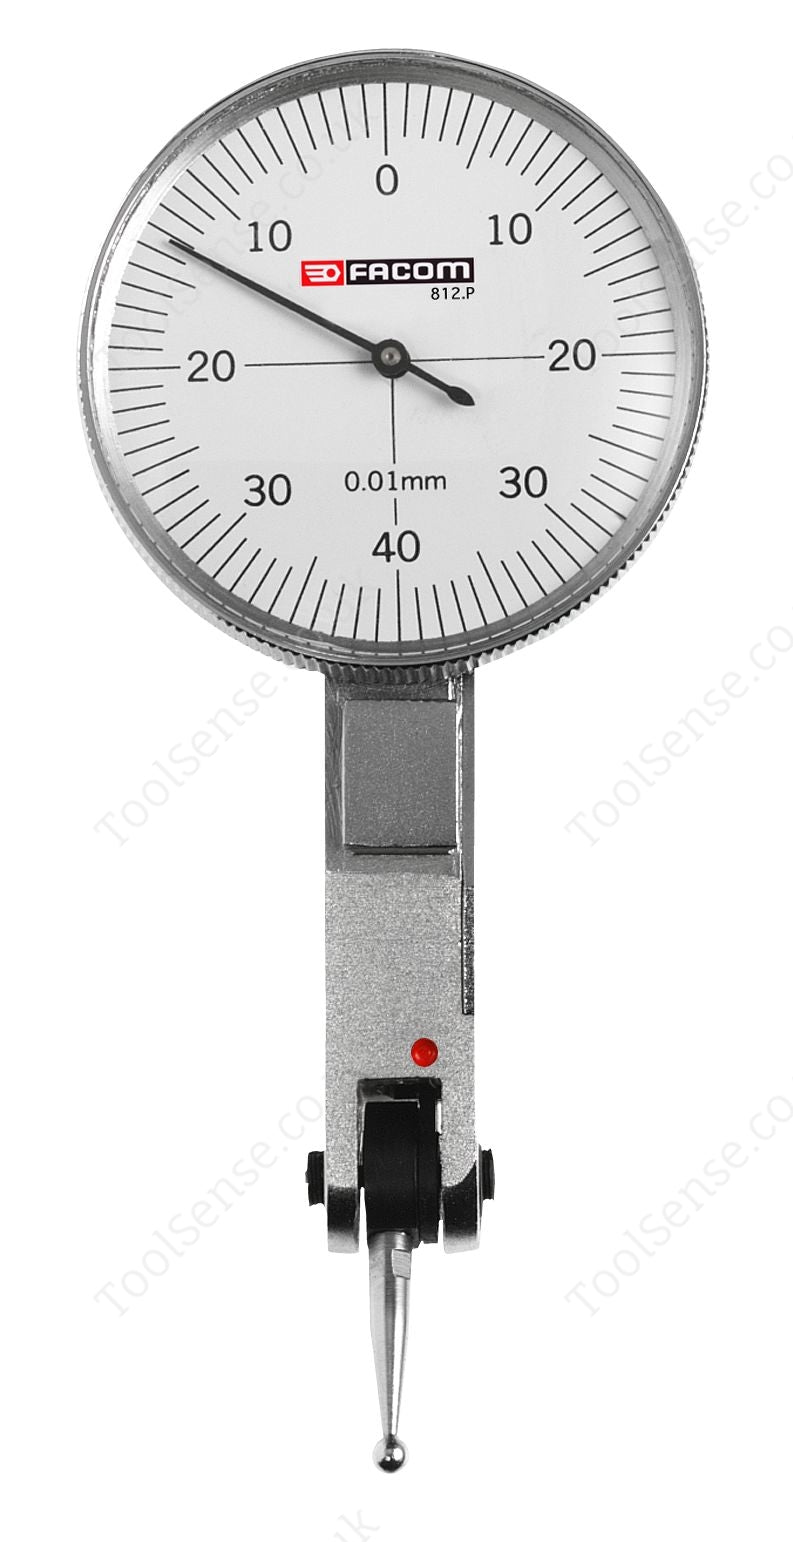 Facom 812B.P LEVER DIAL GAUGE 1/100TH mm ACCURACY